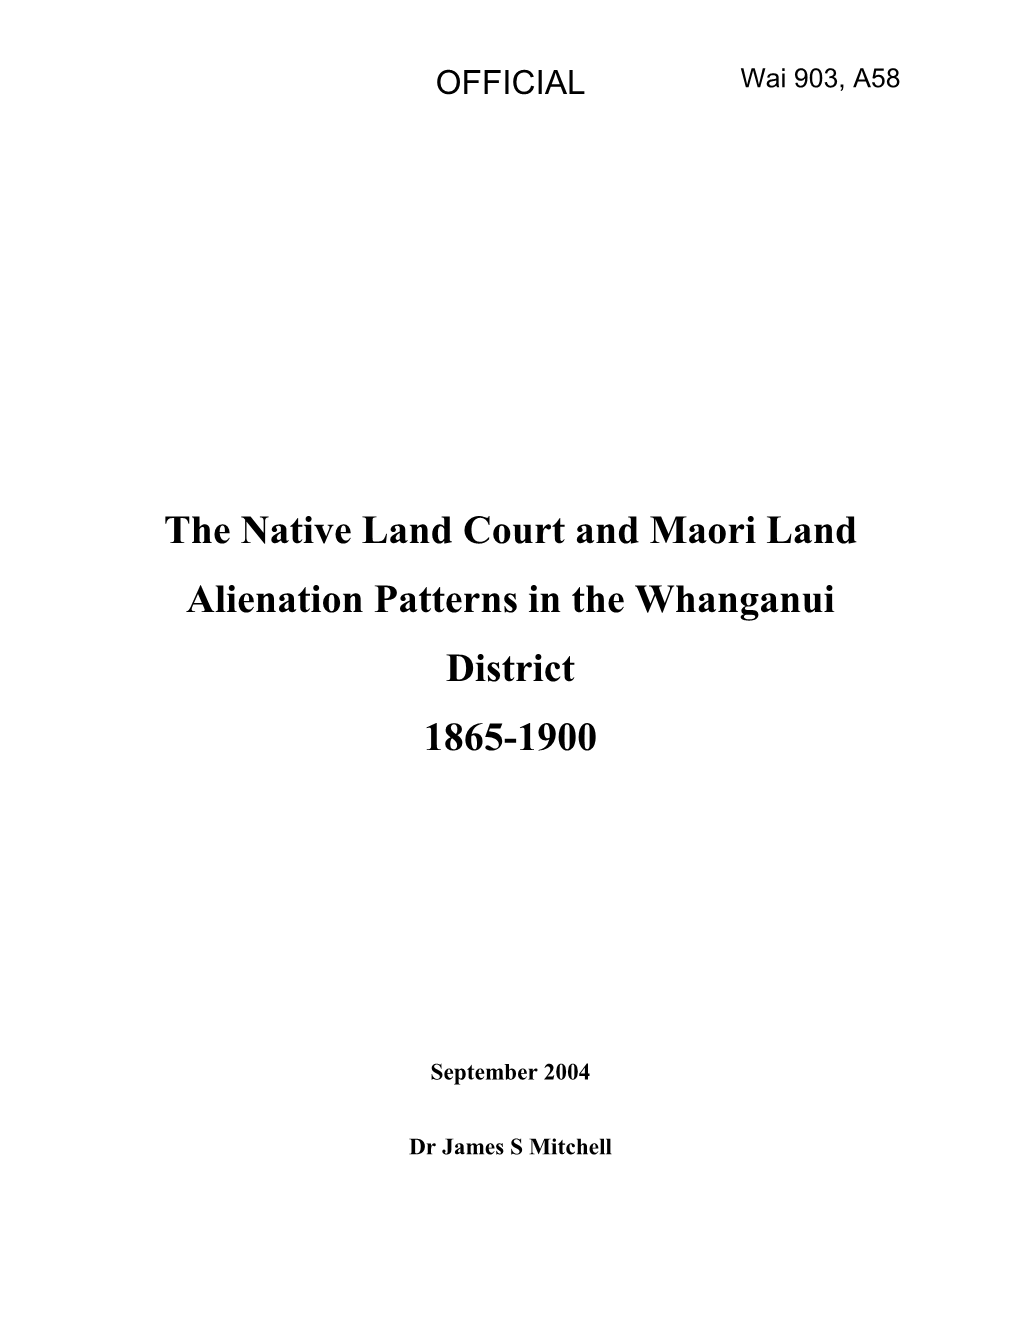 The Native Land Court and Maori Land Alienation Patterns in the Whanganui District 1865-1900